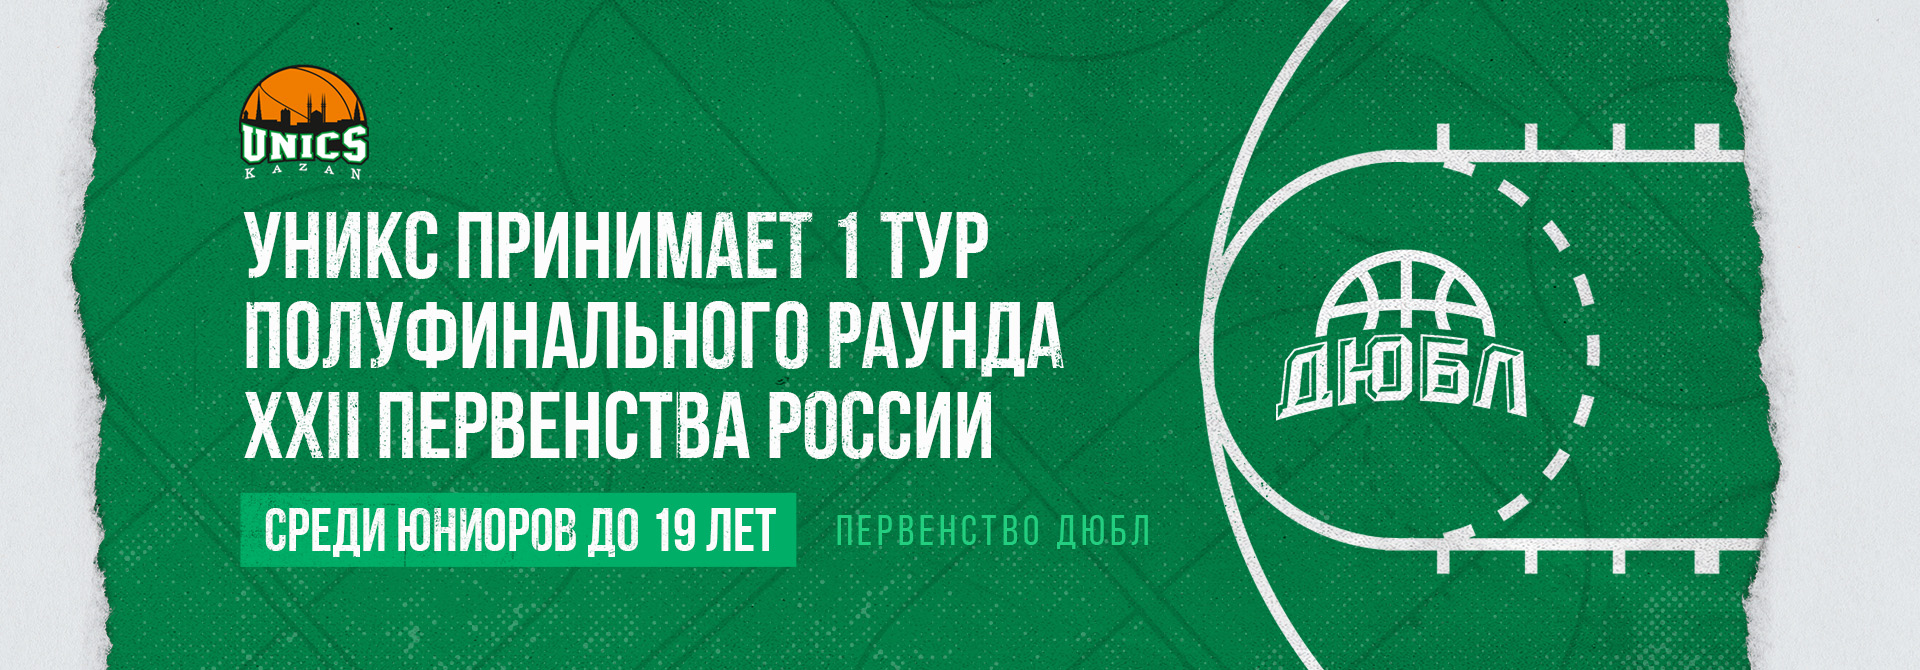 UNICS hosts the 1st round of the Semi-final round of the XXII Championship of Russia among juniors under 19